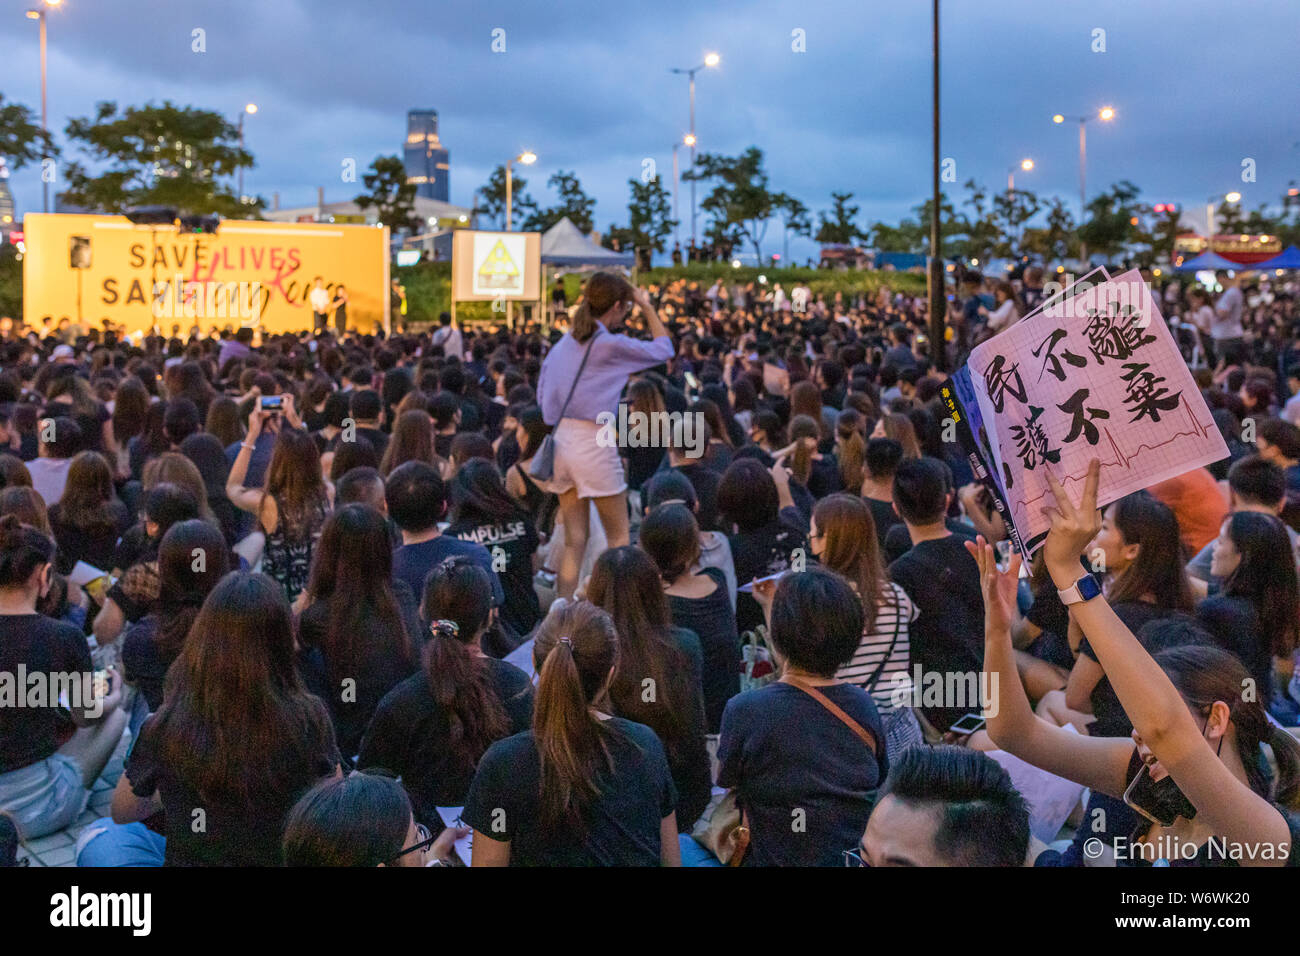 Civil servants of Hong Kong attending the anti government rally with placards.Tens of thousands of civil servants of Hong Kong rallied in the financial district of Hong Kong in an anti government protest to demand the Hong Kong government to listen and answer to the people's demand to fully withdraw the extraditional bill. Stock Photo